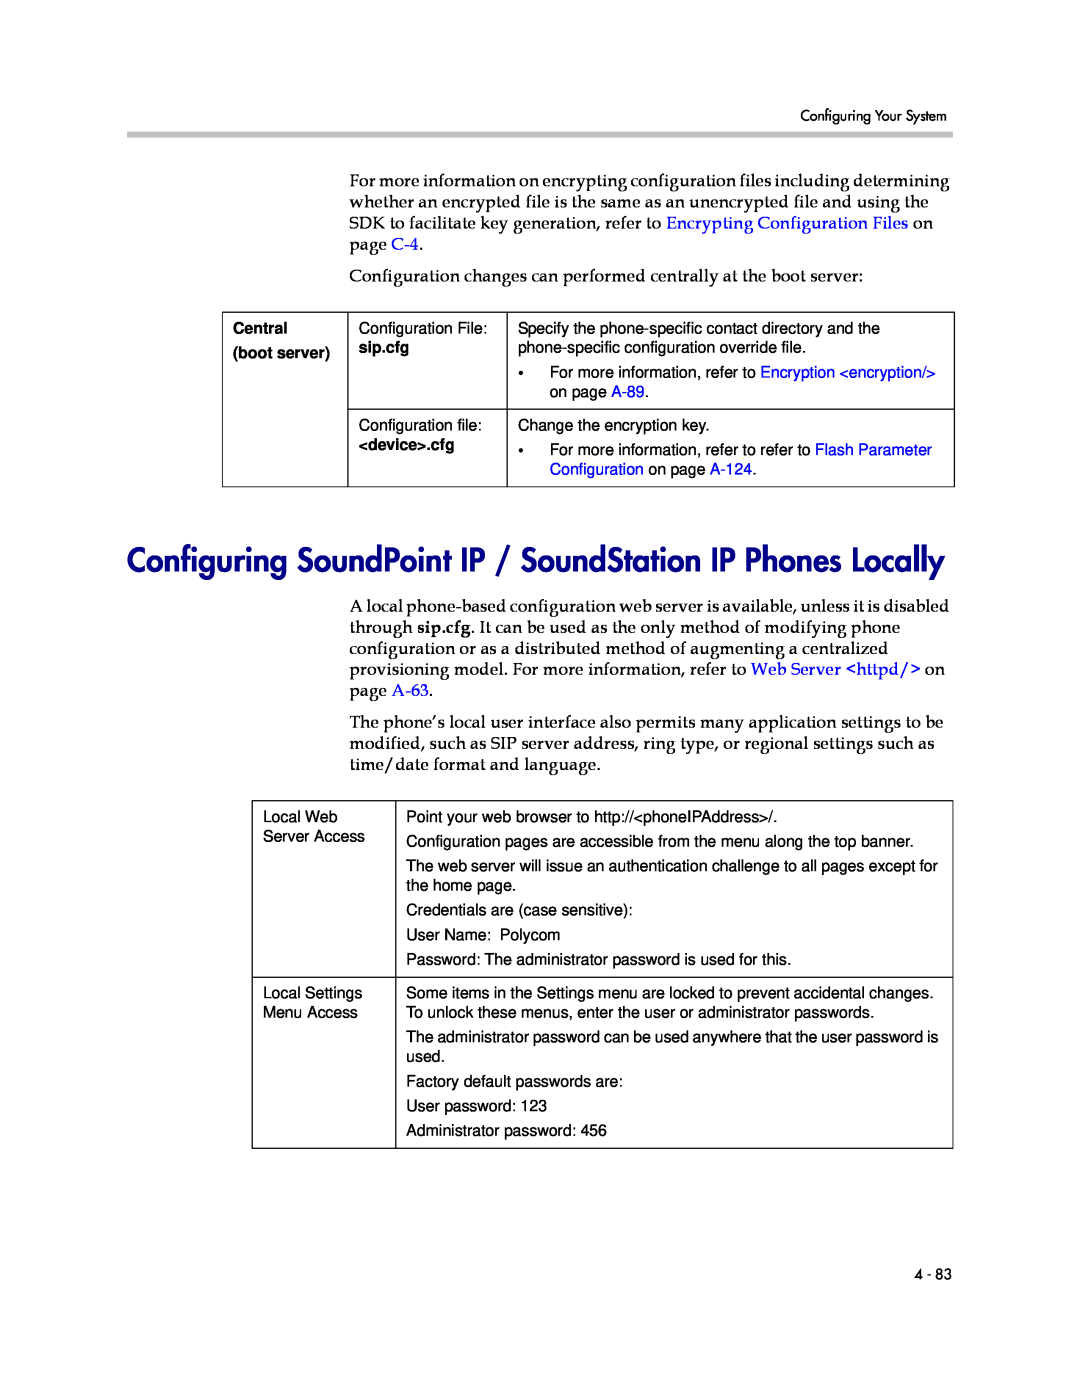 Polycom SIP 3.1 manual Configuring SoundPoint IP / SoundStation IP Phones Locally, Configuration on page A-124 